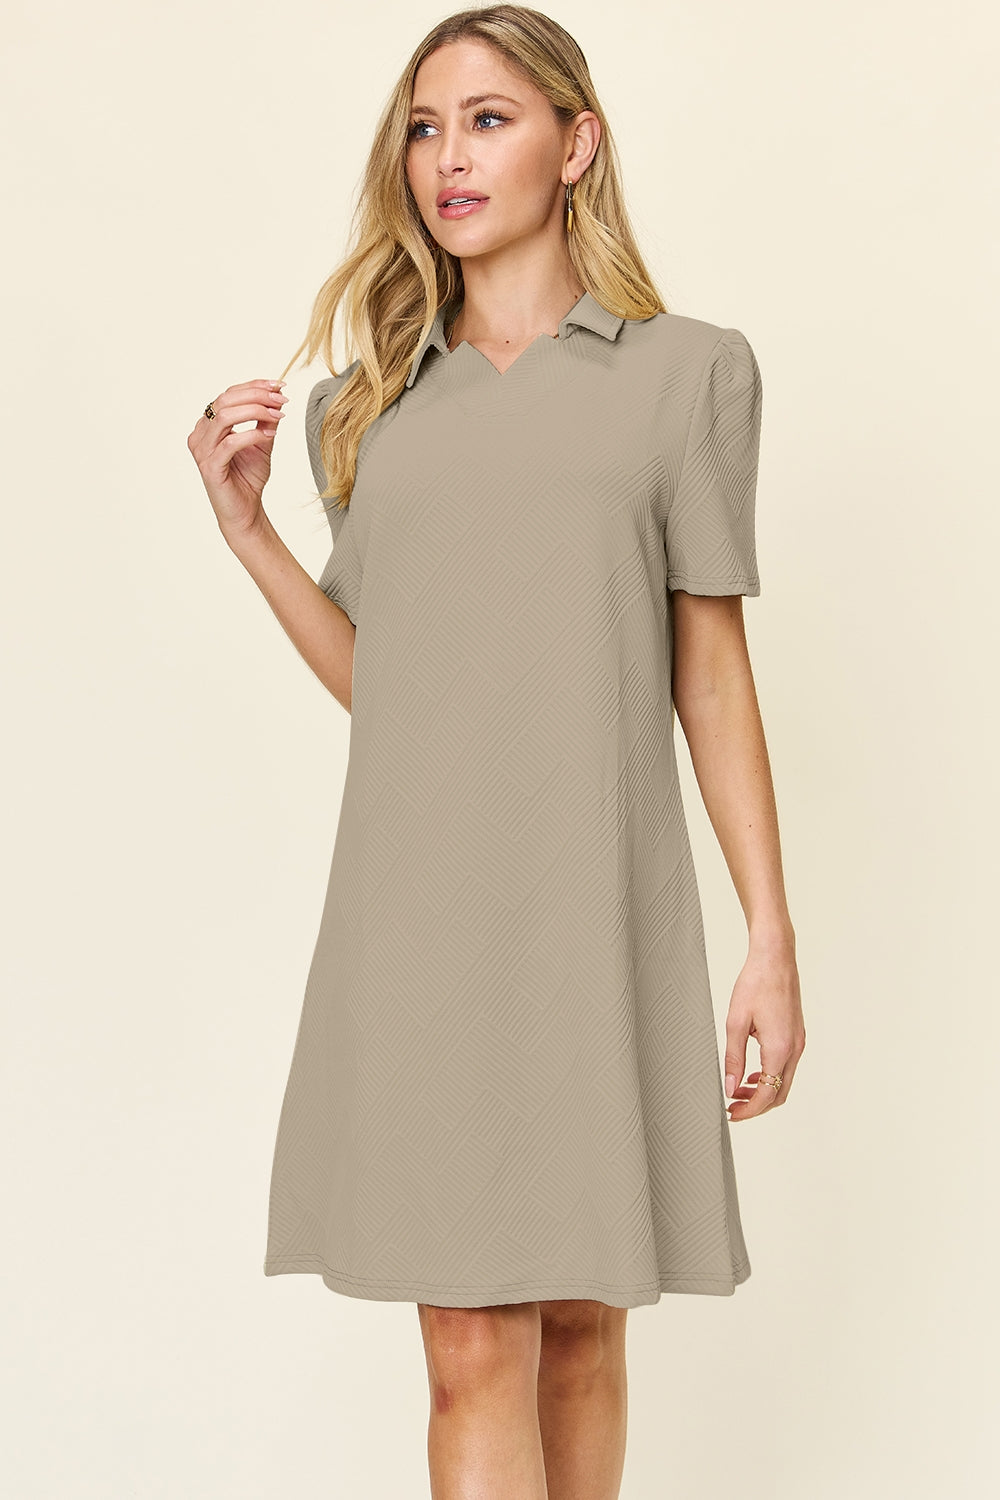 The Country Club Dress